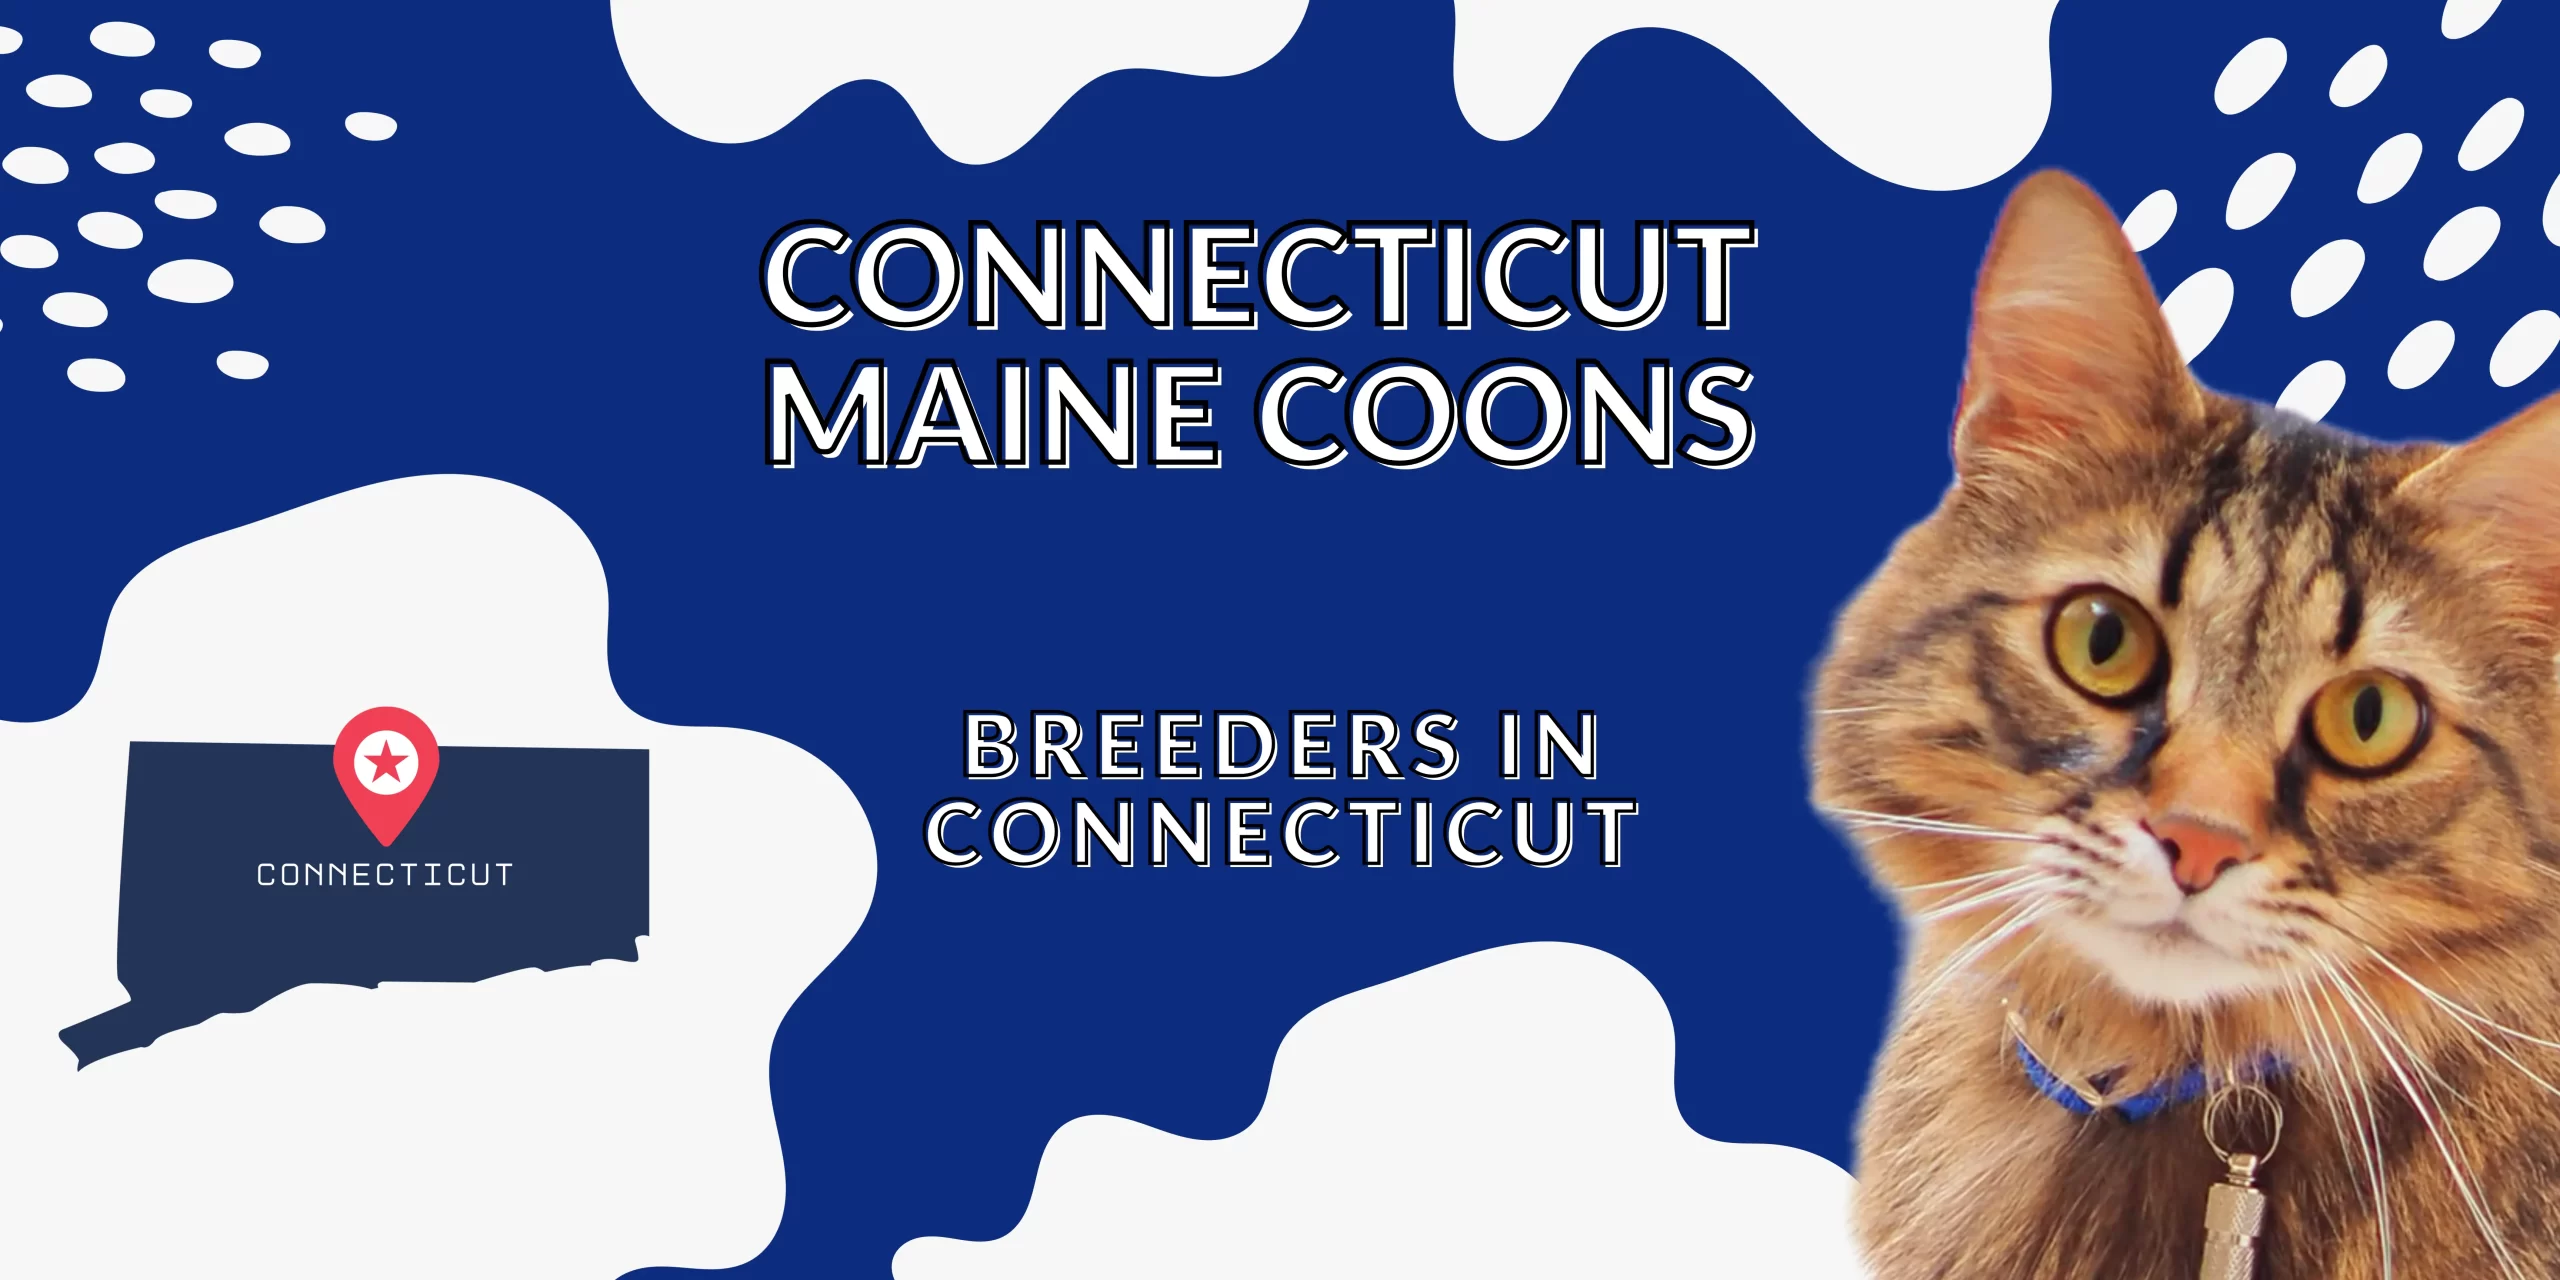 Connecticut Maine coon breeders